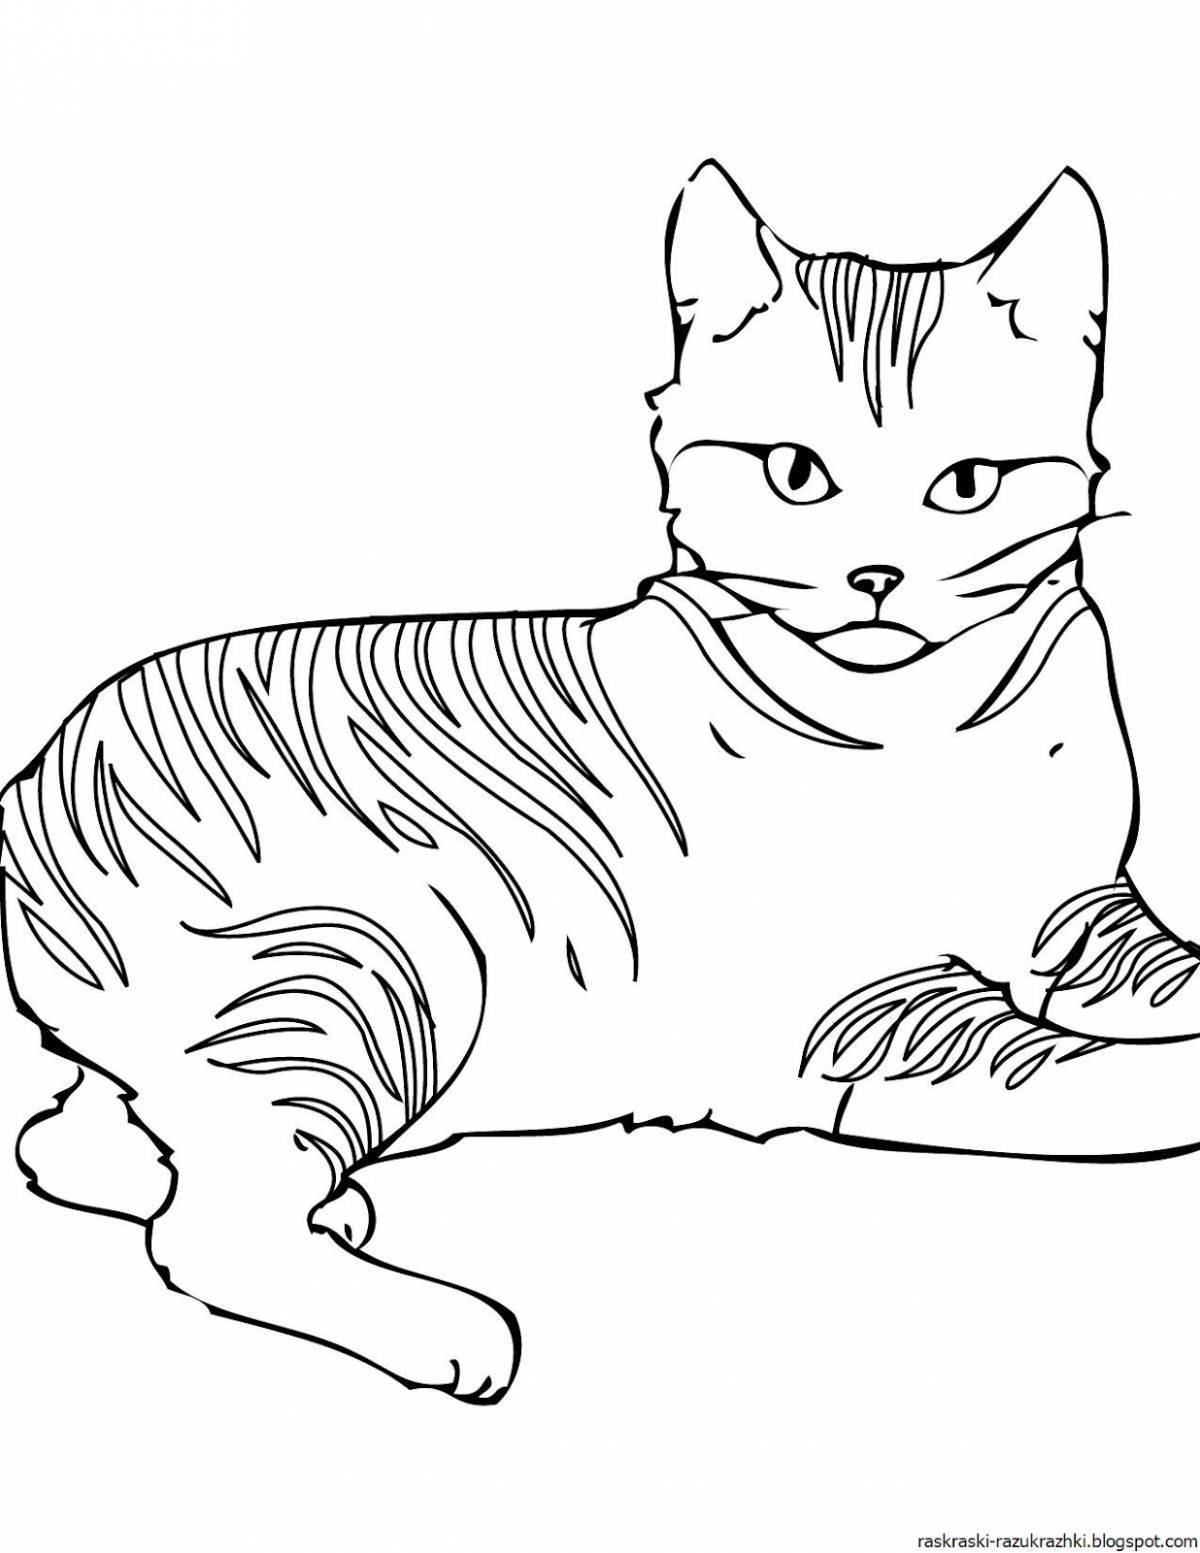 Shining cat coloring page